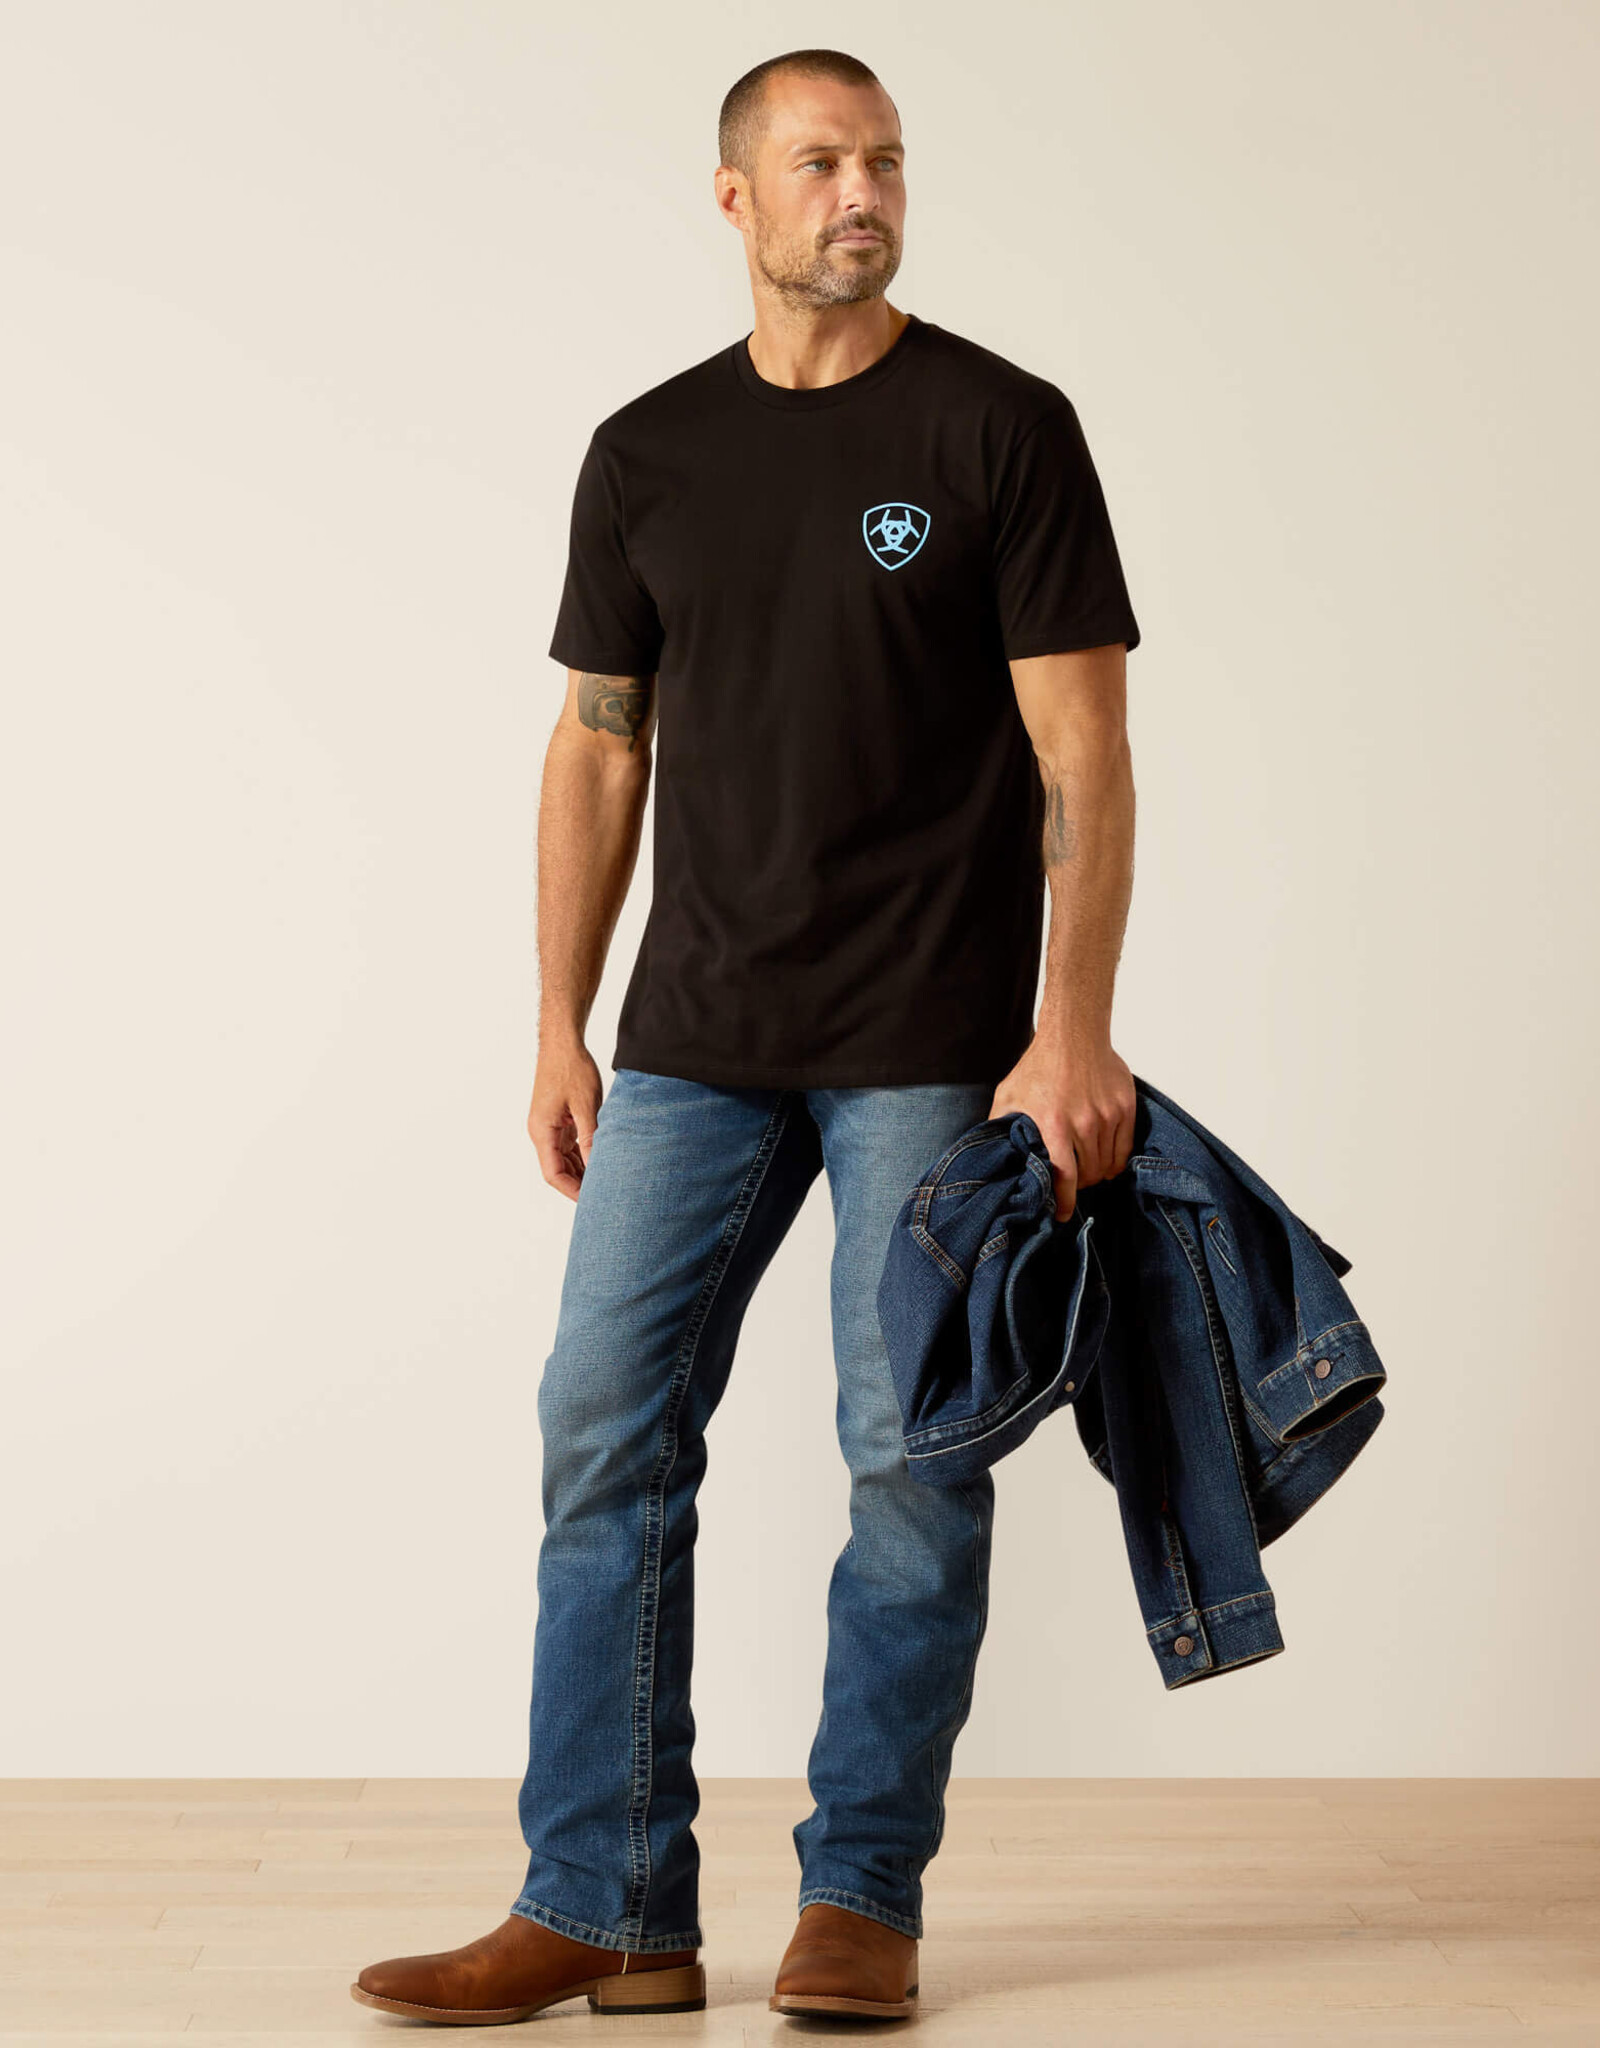 Ariat Ariat Mens Dusty Blue Logo and Barbwire Black Short Sleeve T Shirt